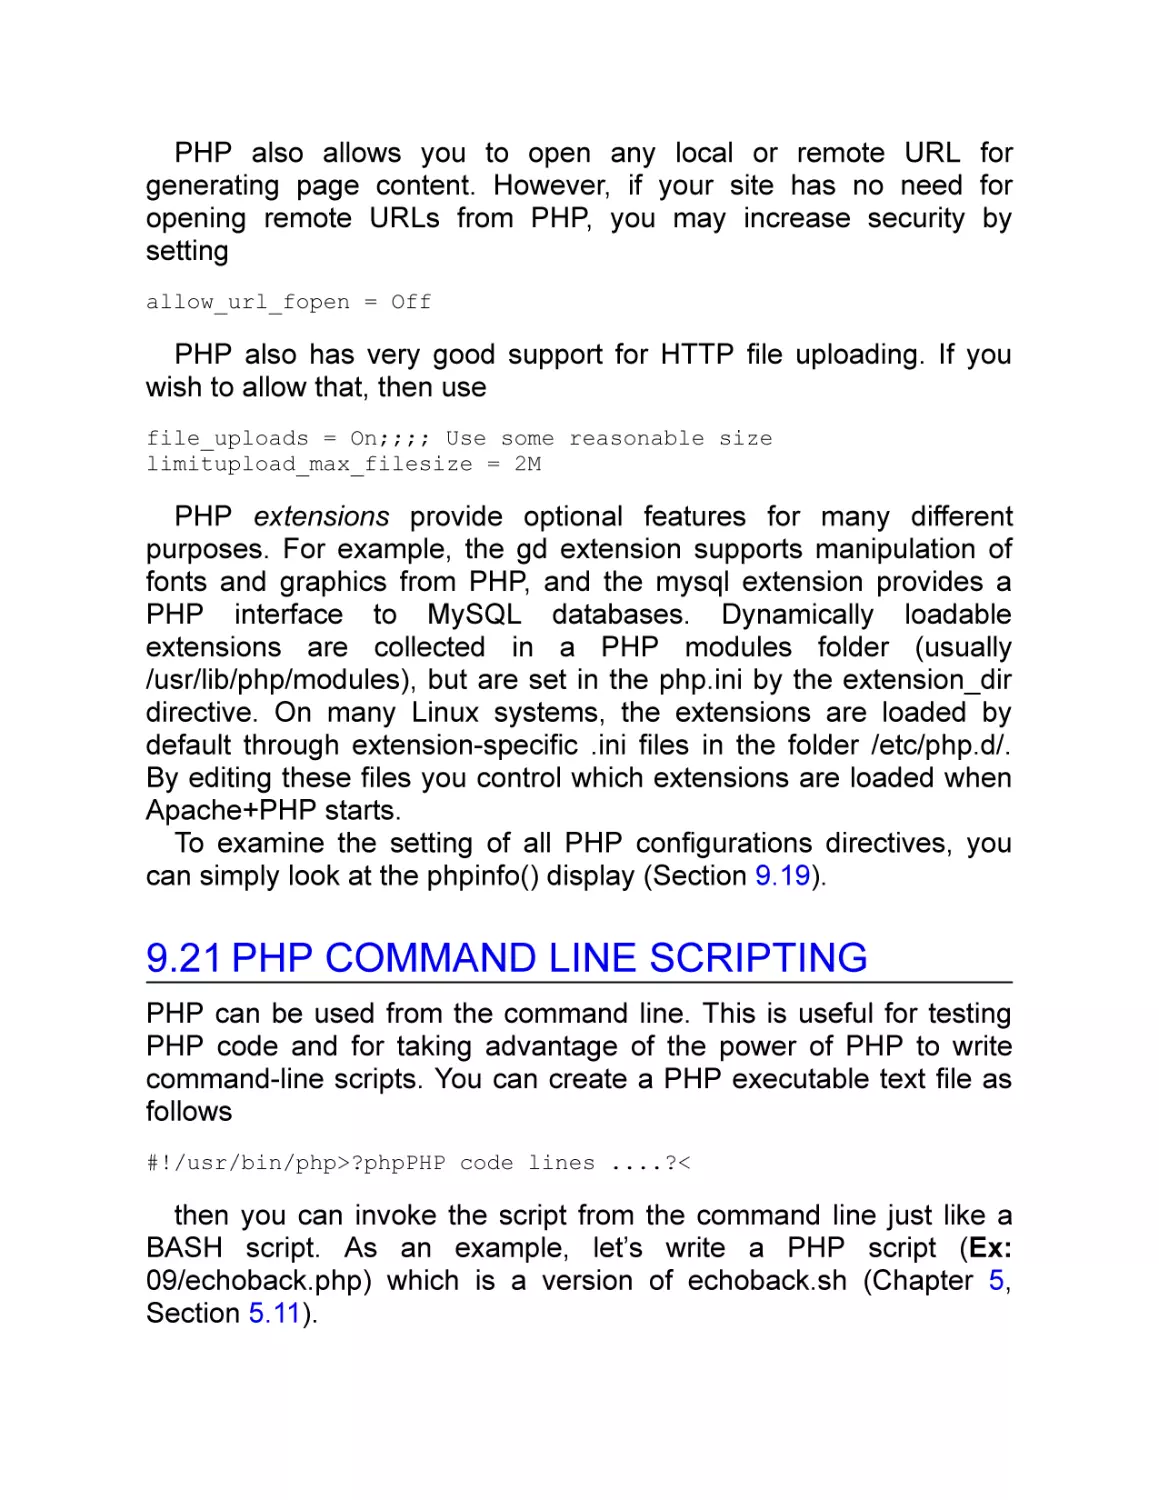 9.21 PHP Command Line Scripting